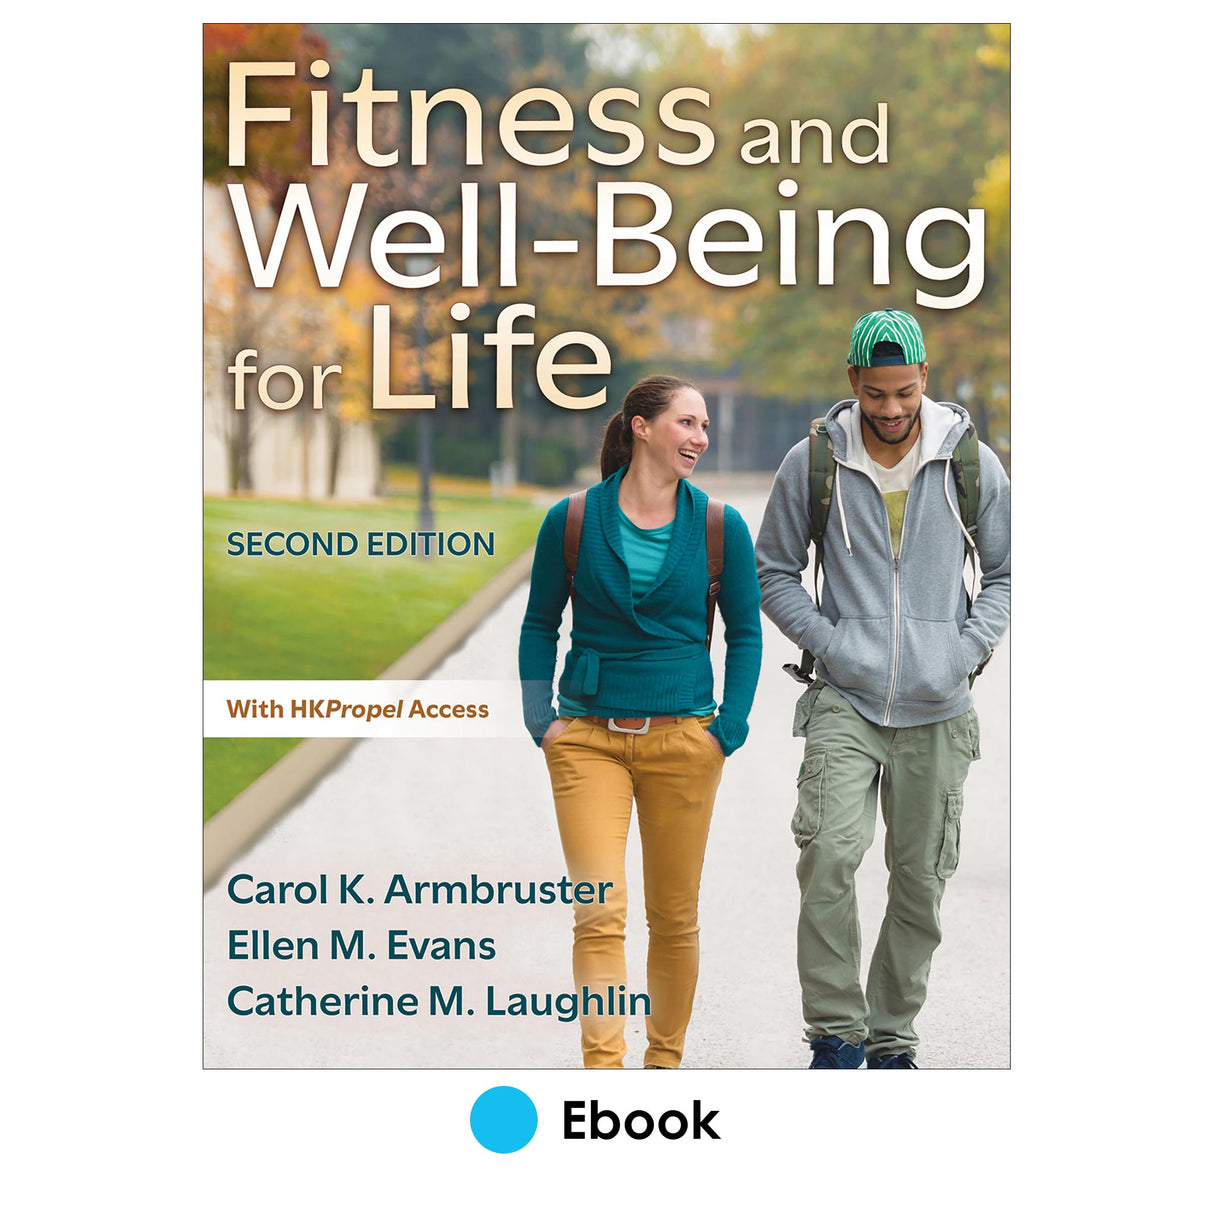 Fitness and Well-Being for Life 2nd Edition Ebook With HKPropel Access